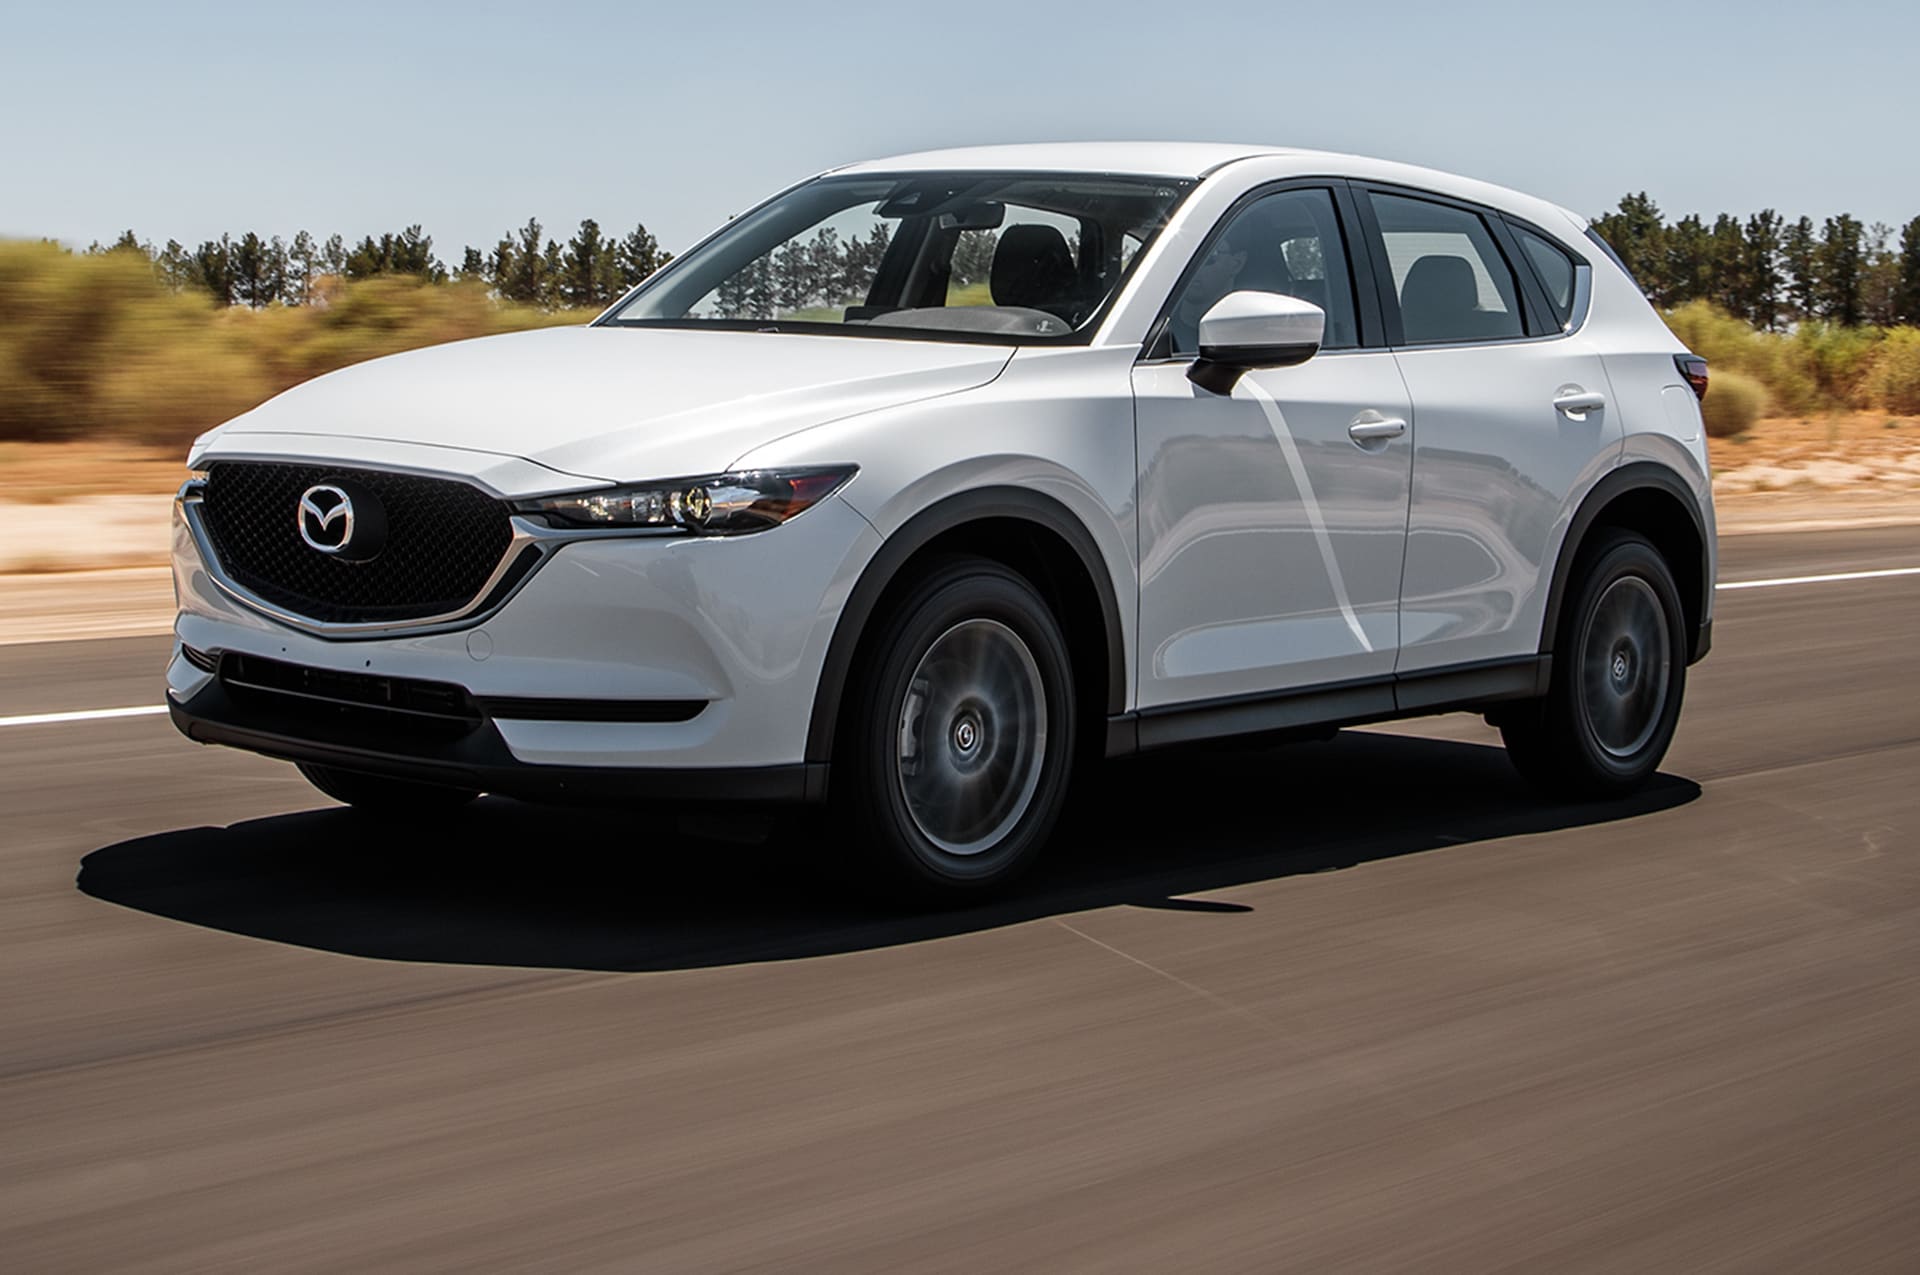 Mazda CX-5: 2018 Motor Trend SUV of the Year Contender